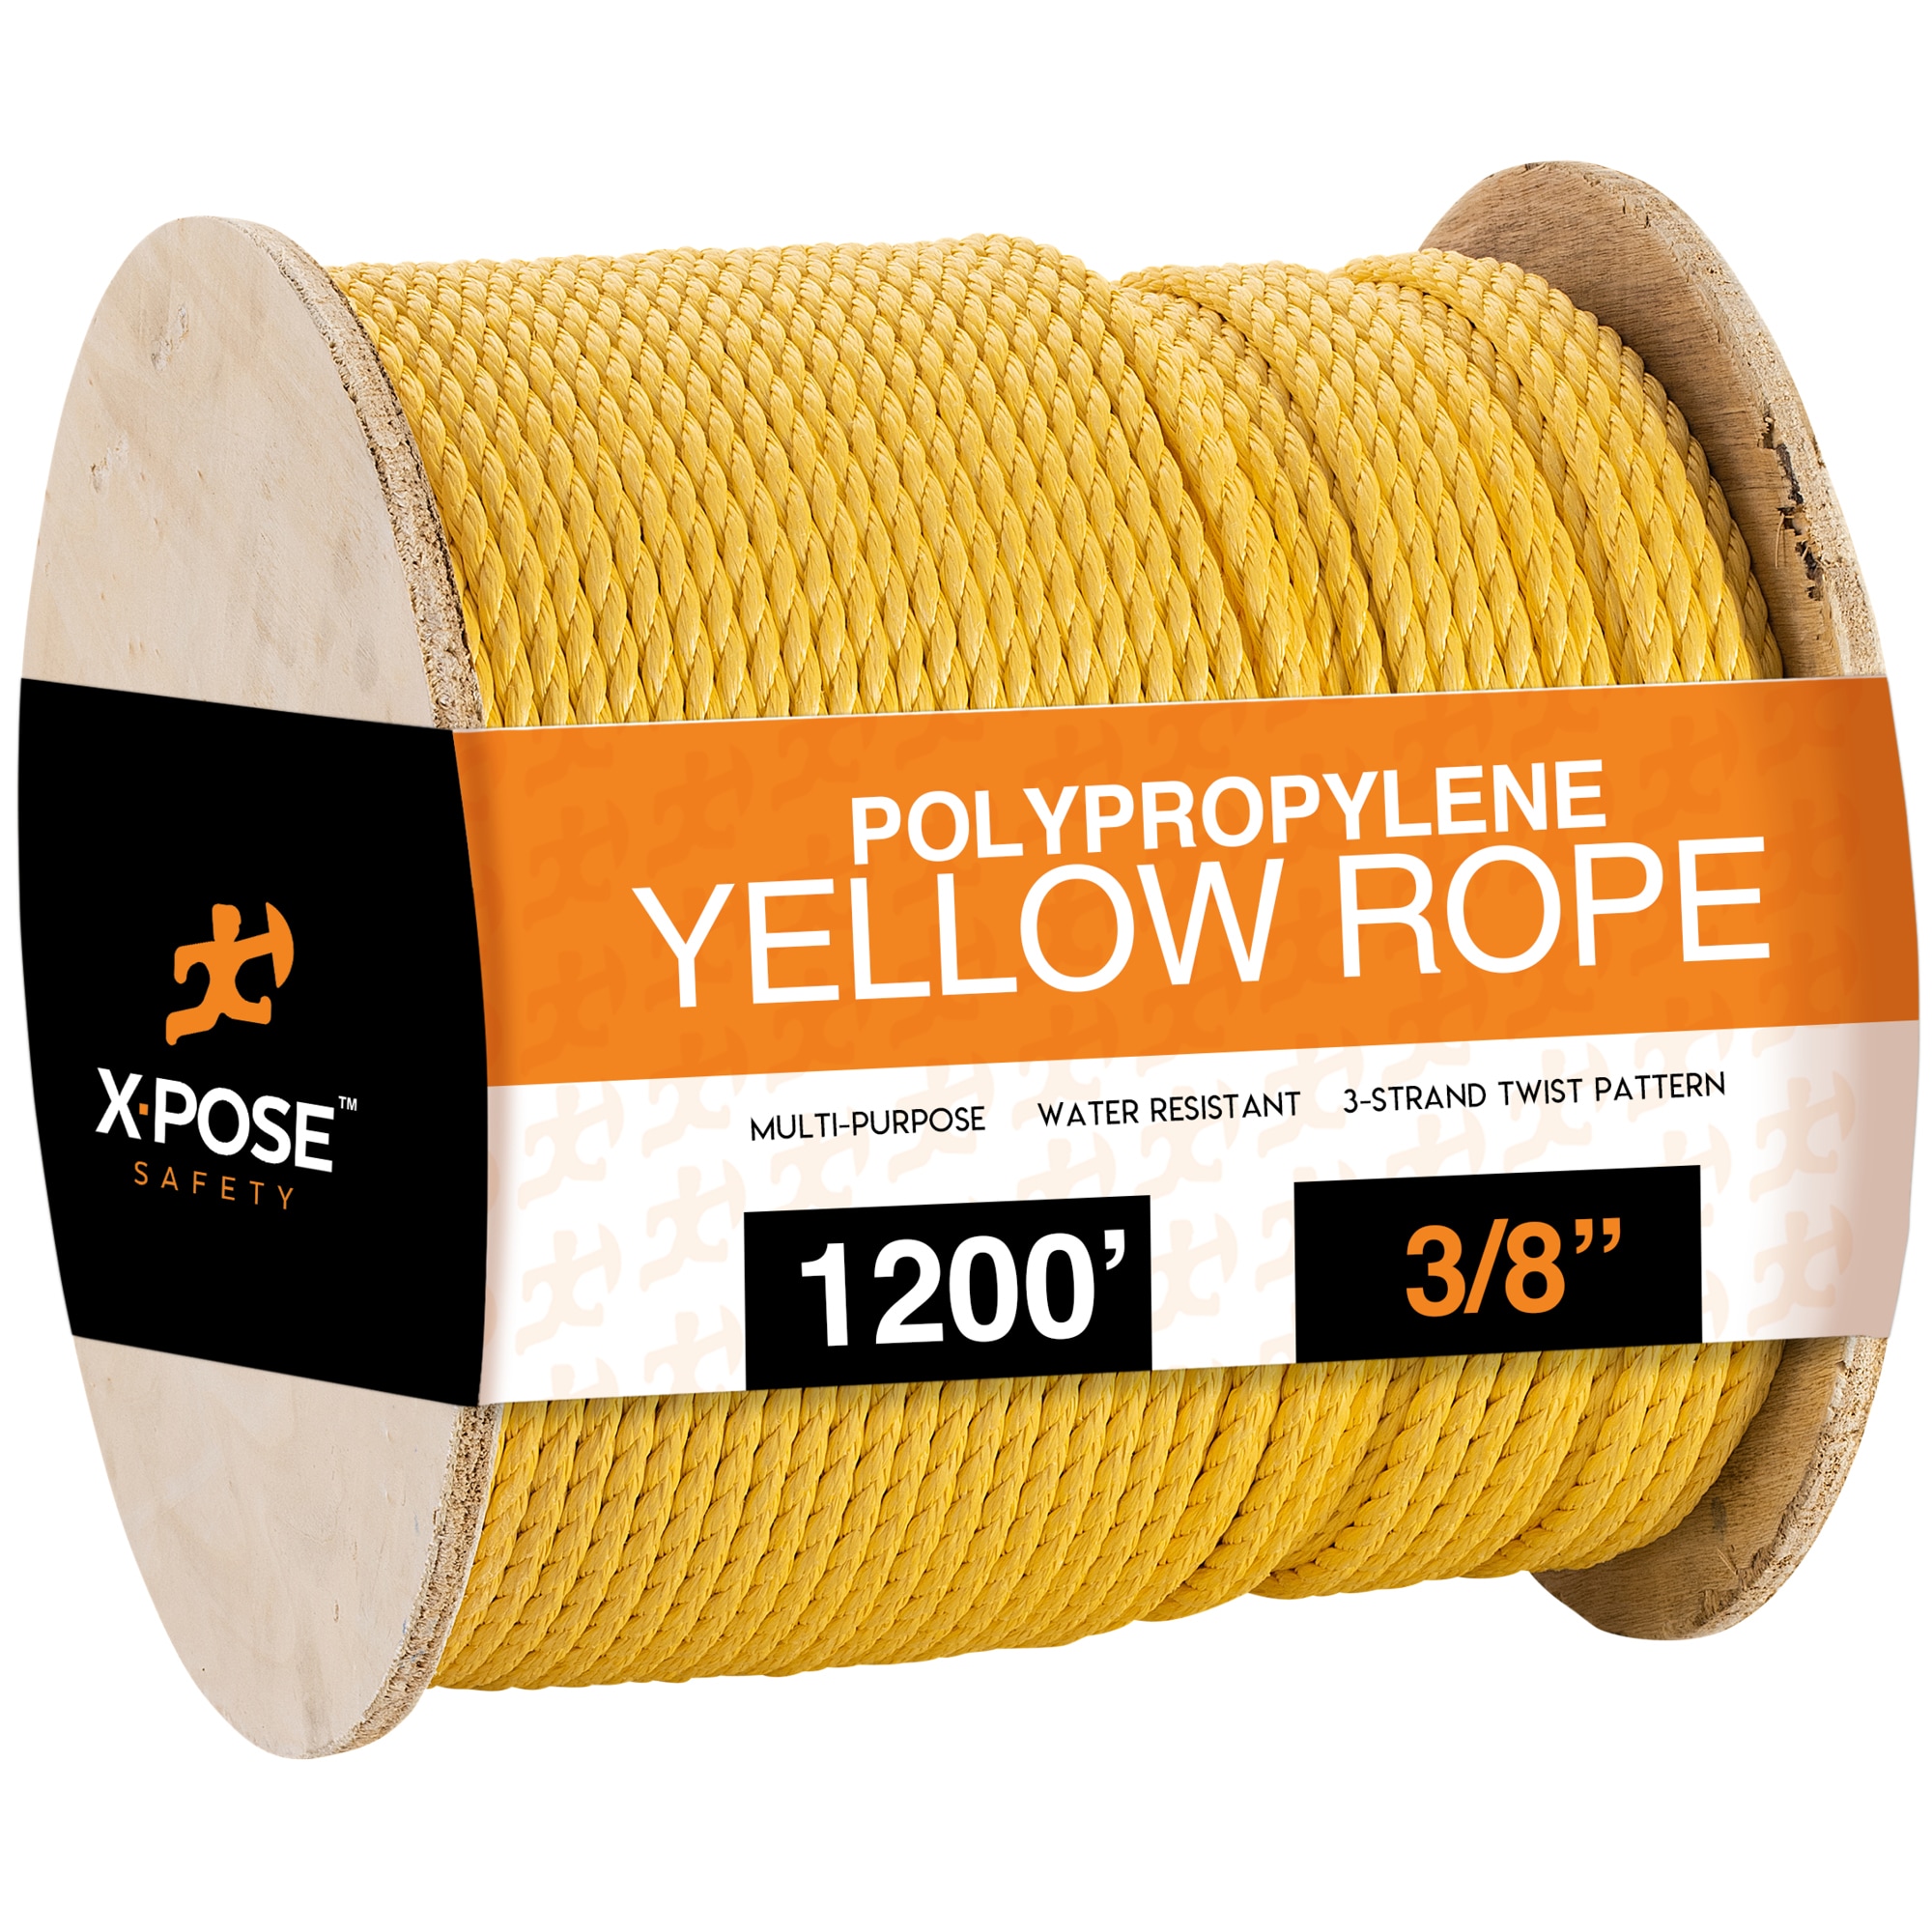 XPOSE SAFETY Yellow Twisted Polypropylene Rope - 3/8 Inch Floating